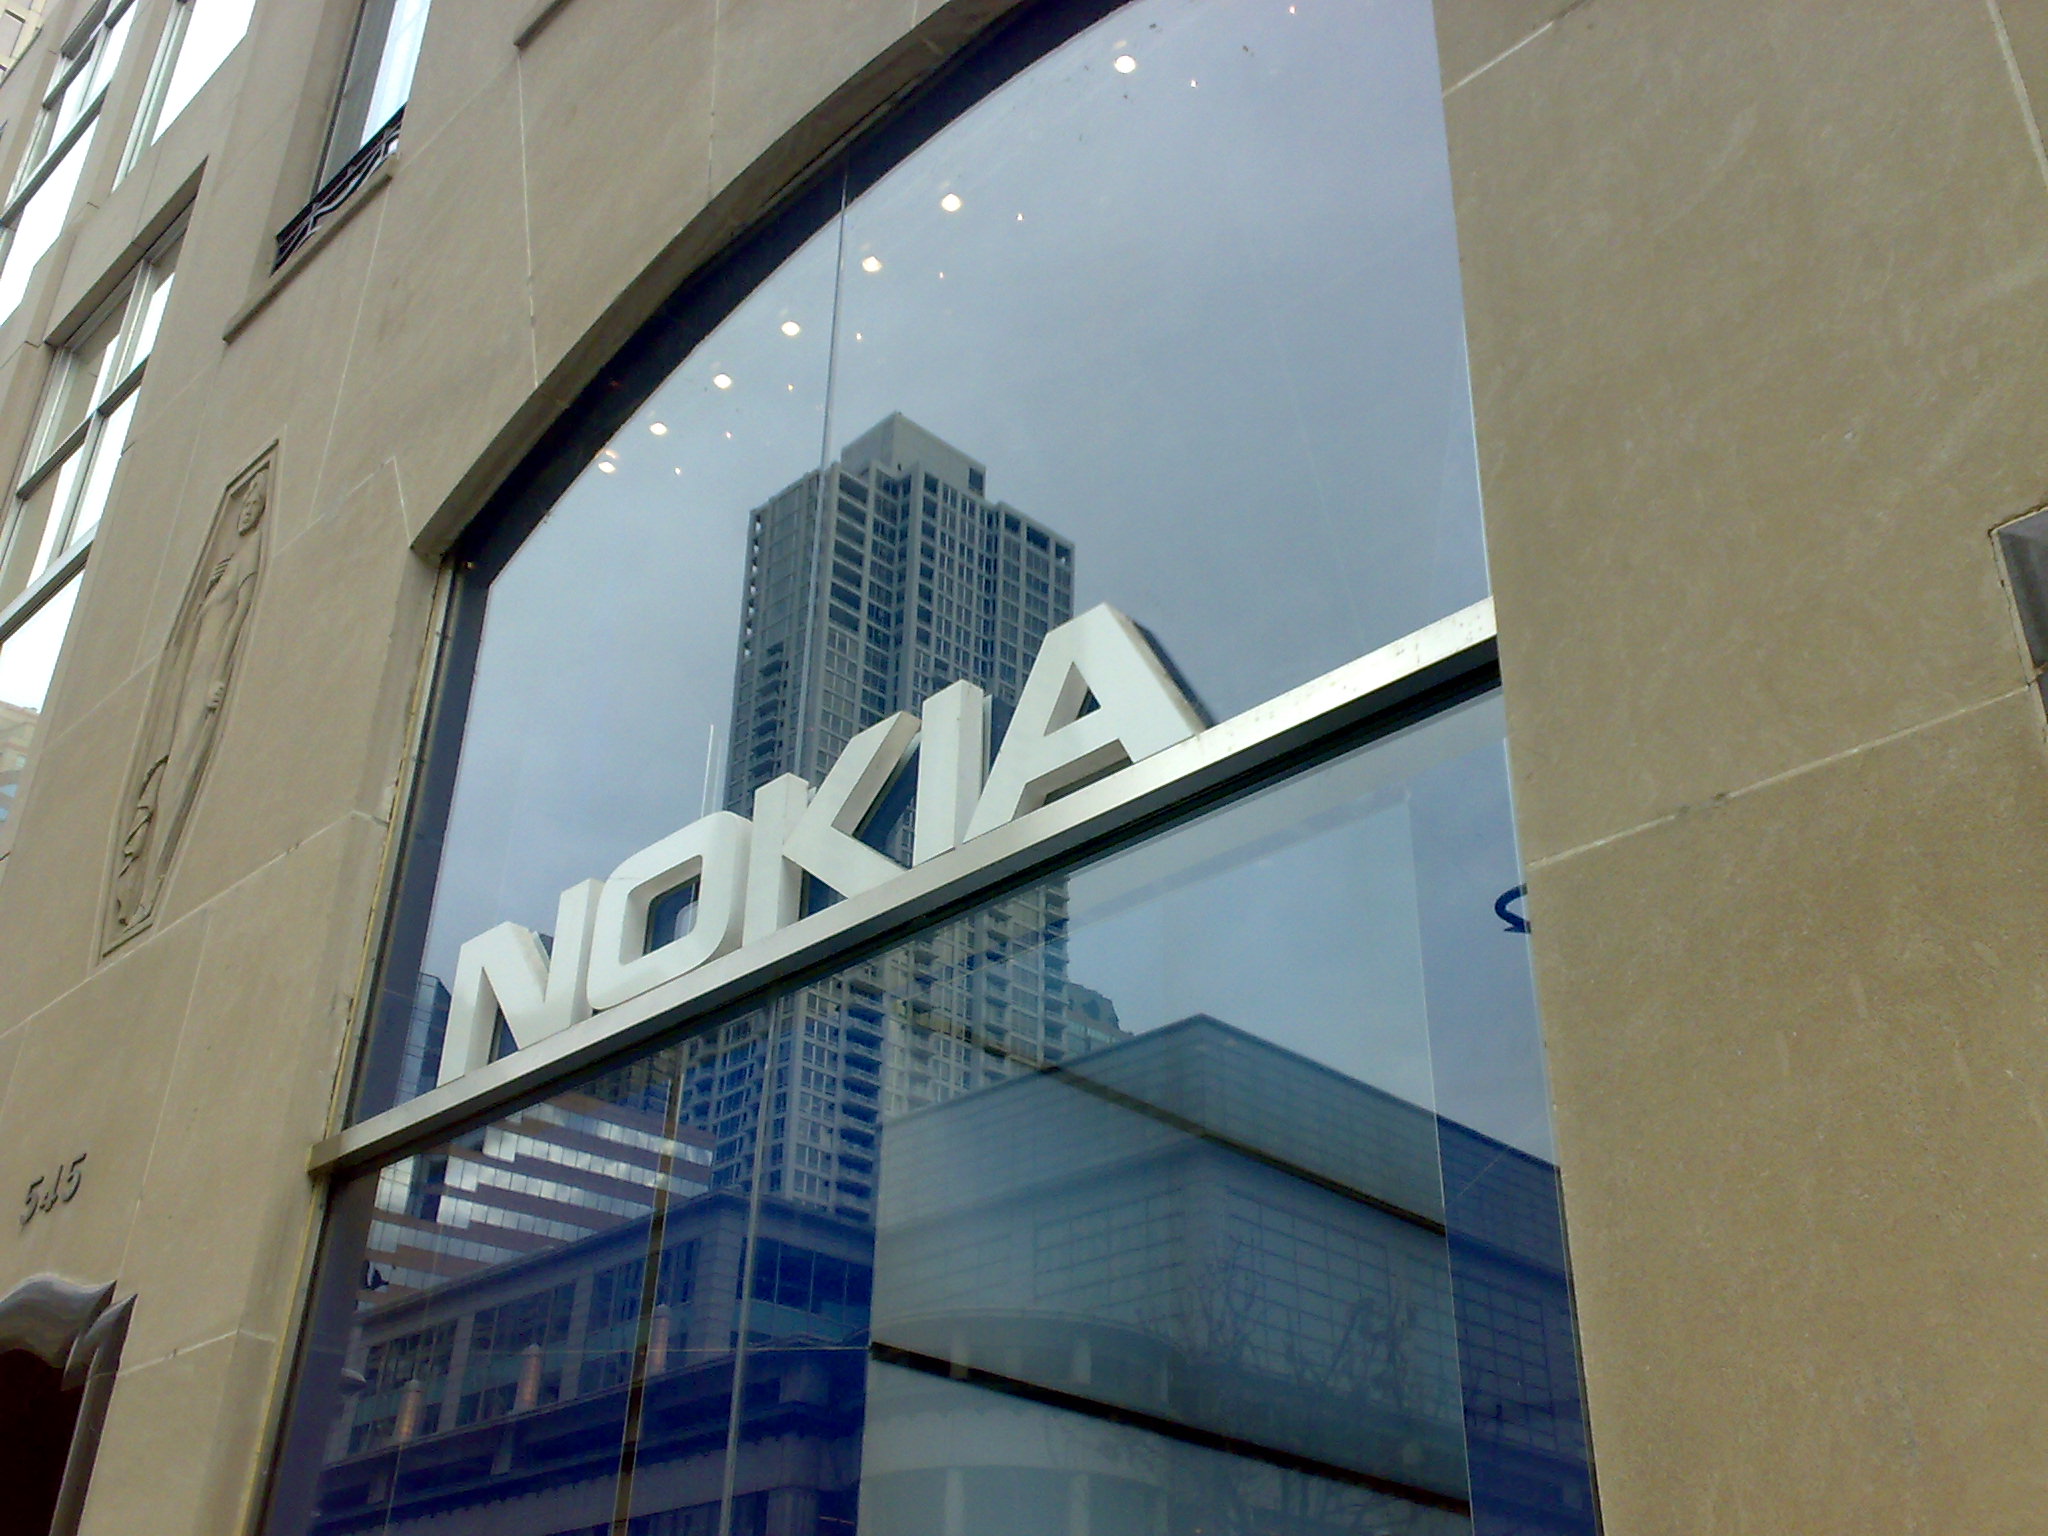 the nokia logo is reflected in a glass wall